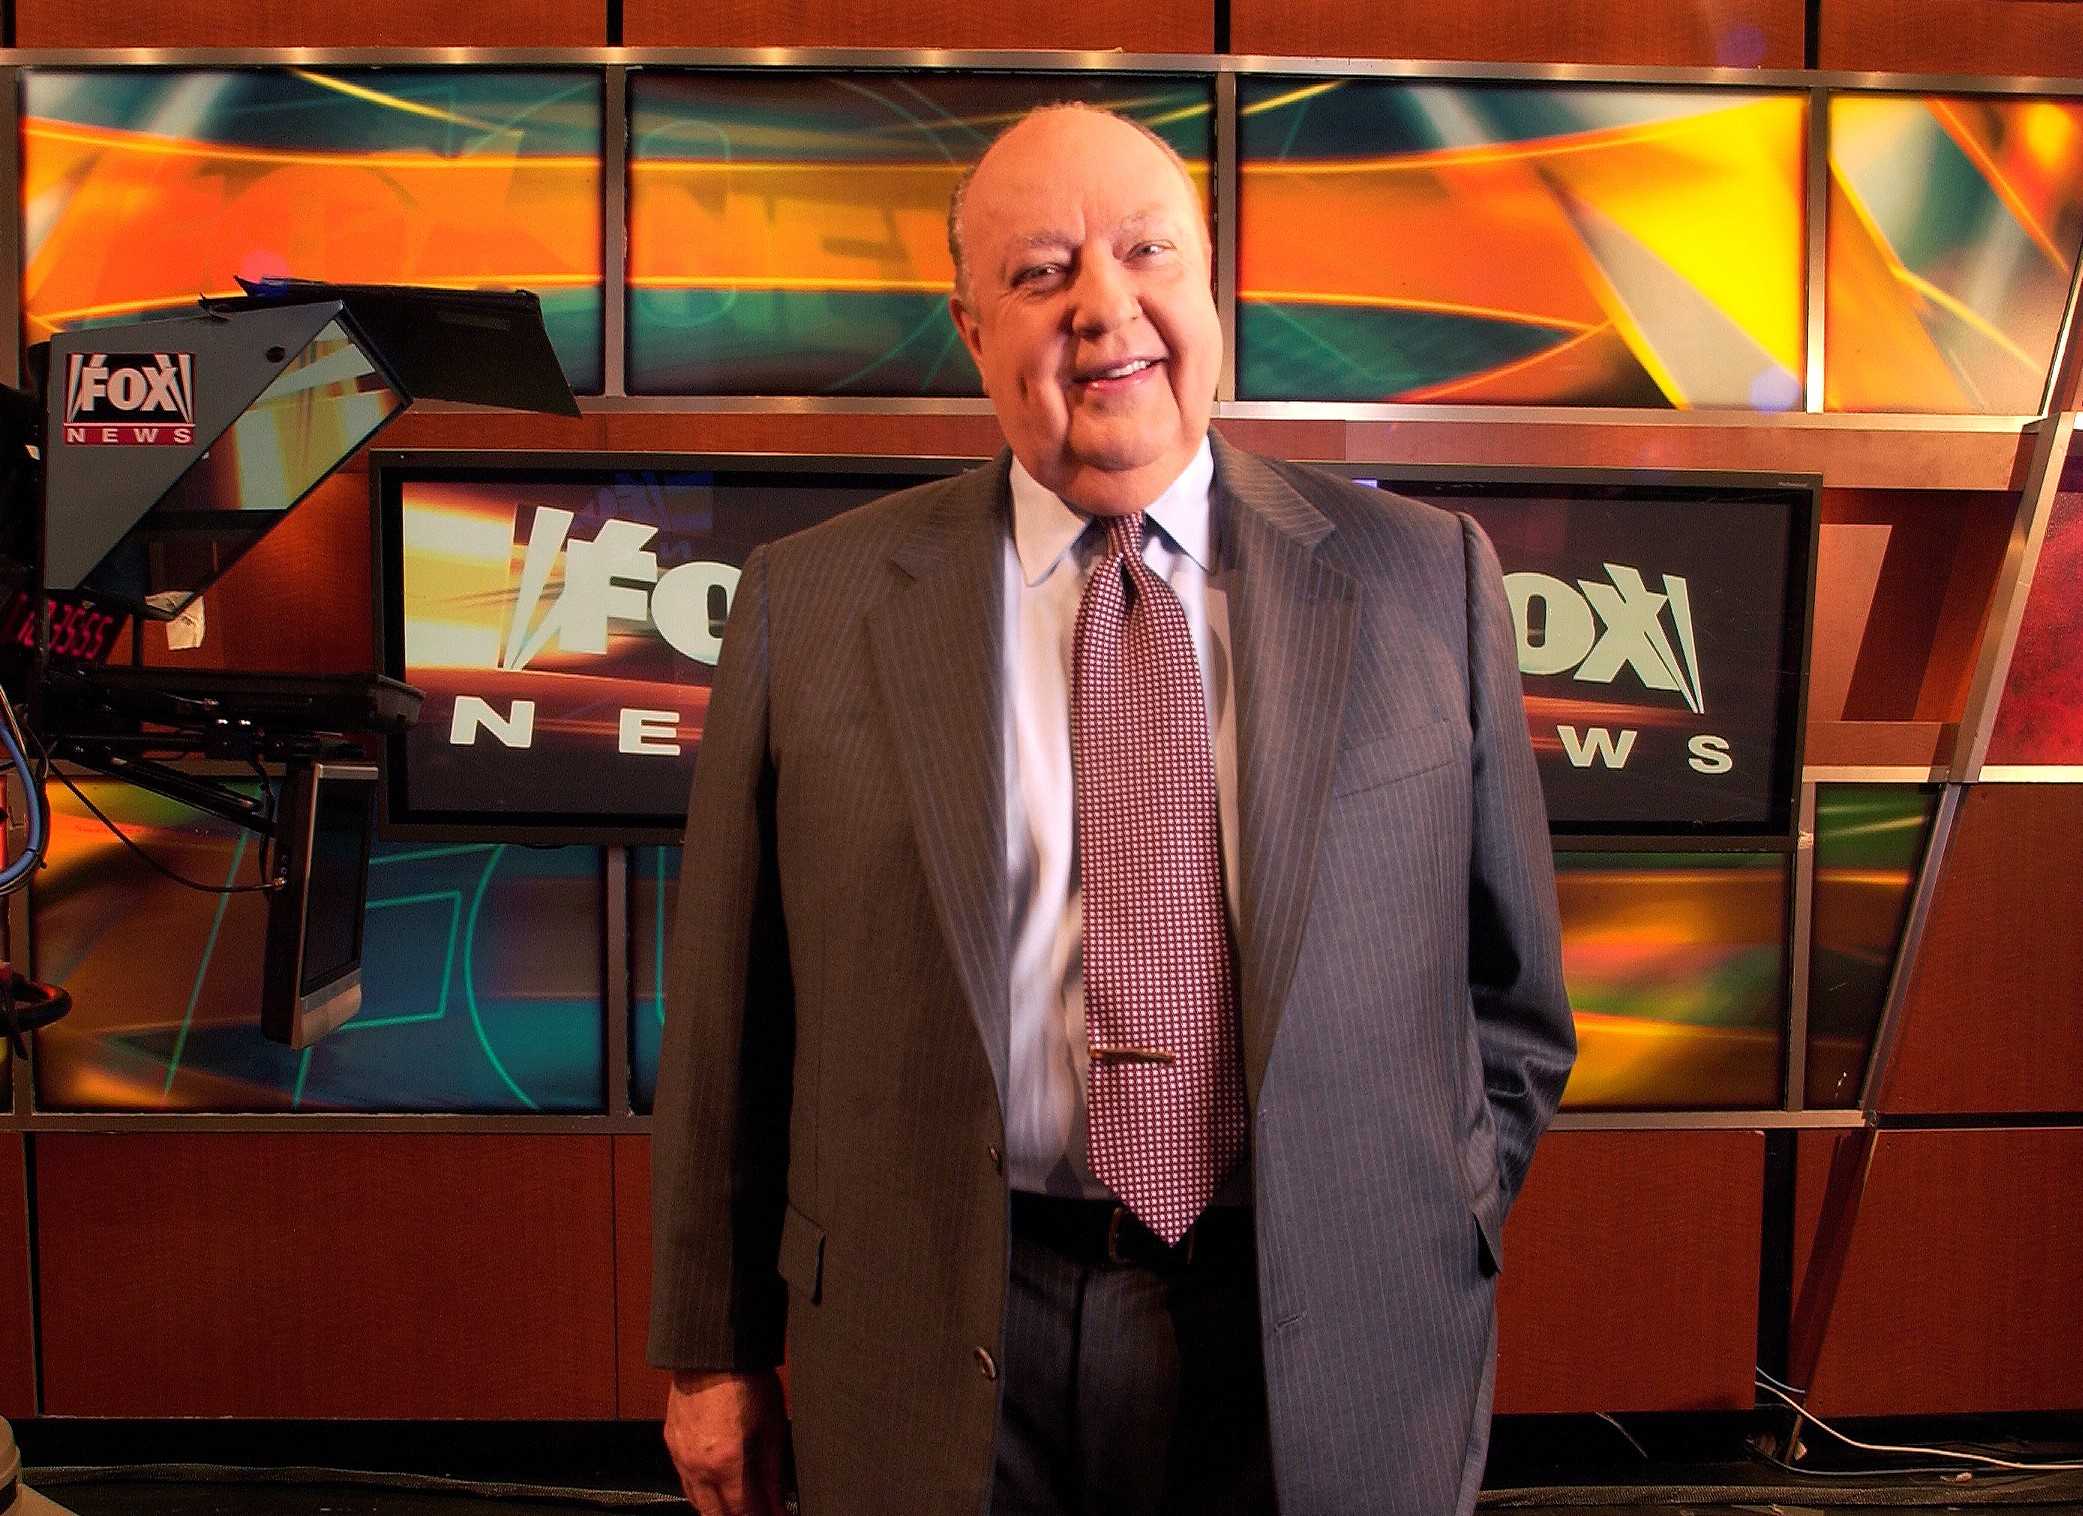 Influential Fox News founder Roger Ailes dies at 77